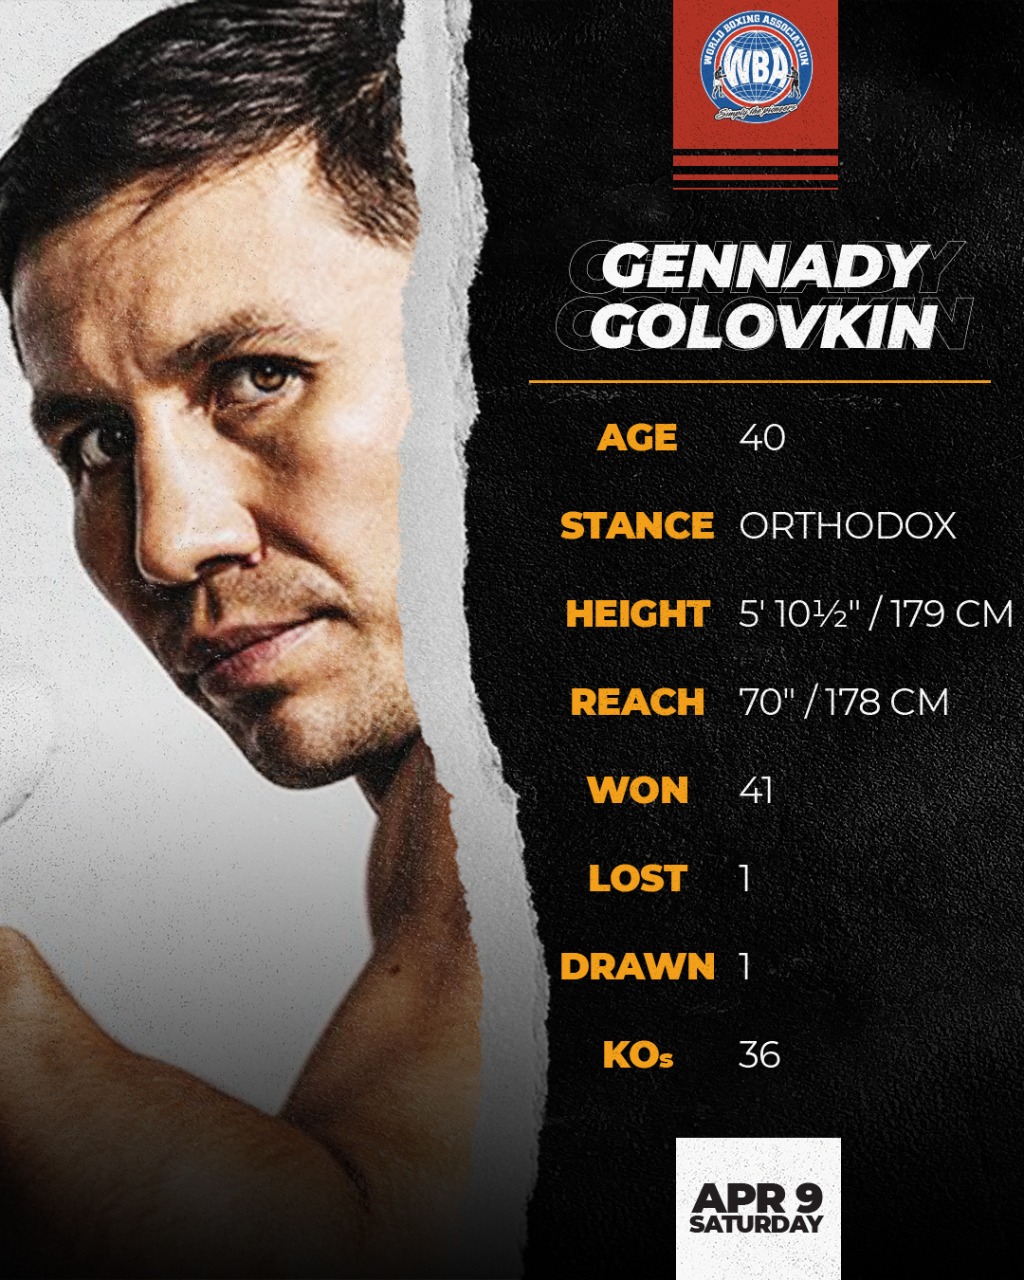 Golovkin to remind the world who he is